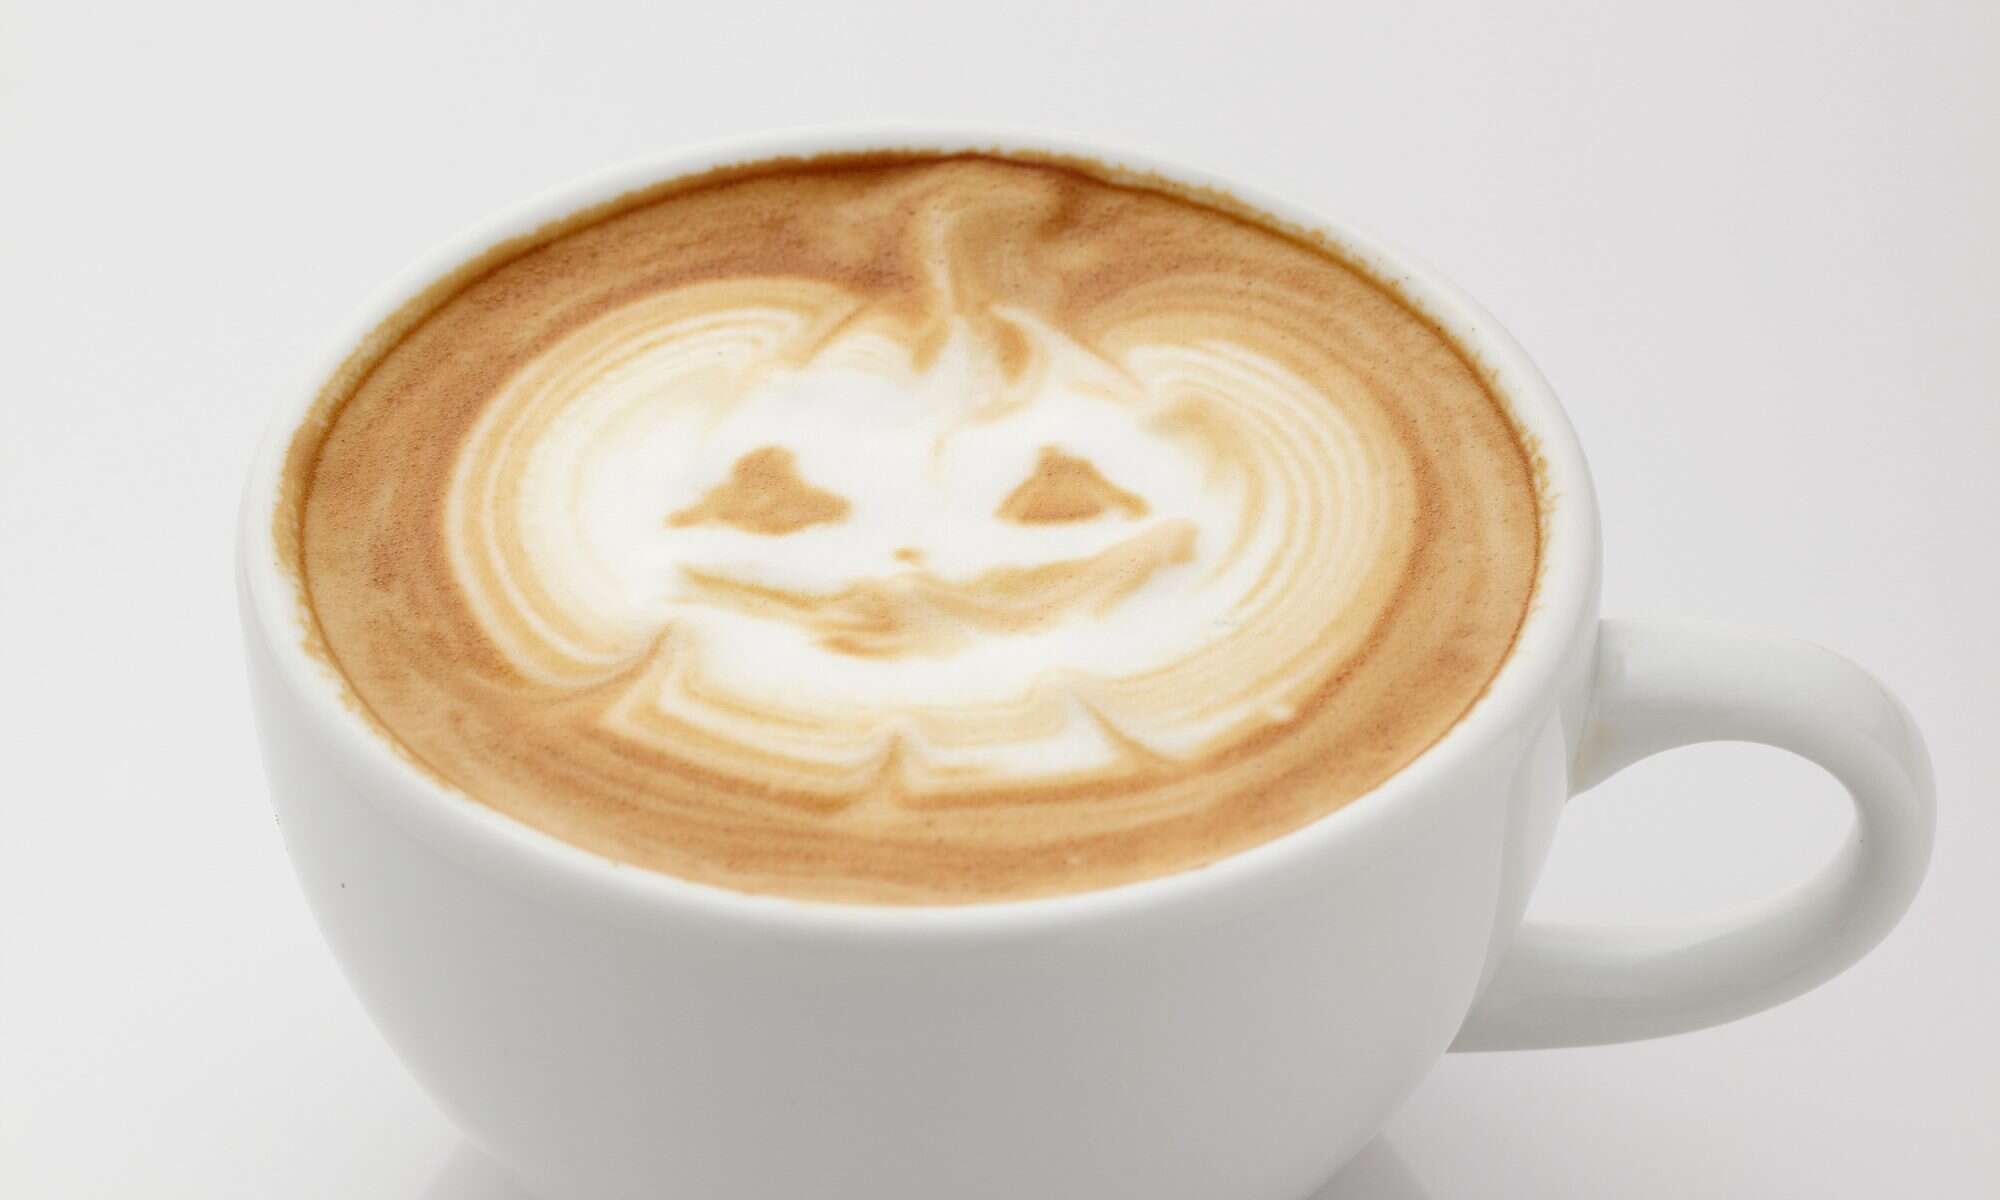 Halloween Latte Art Is a Trick and a Treat